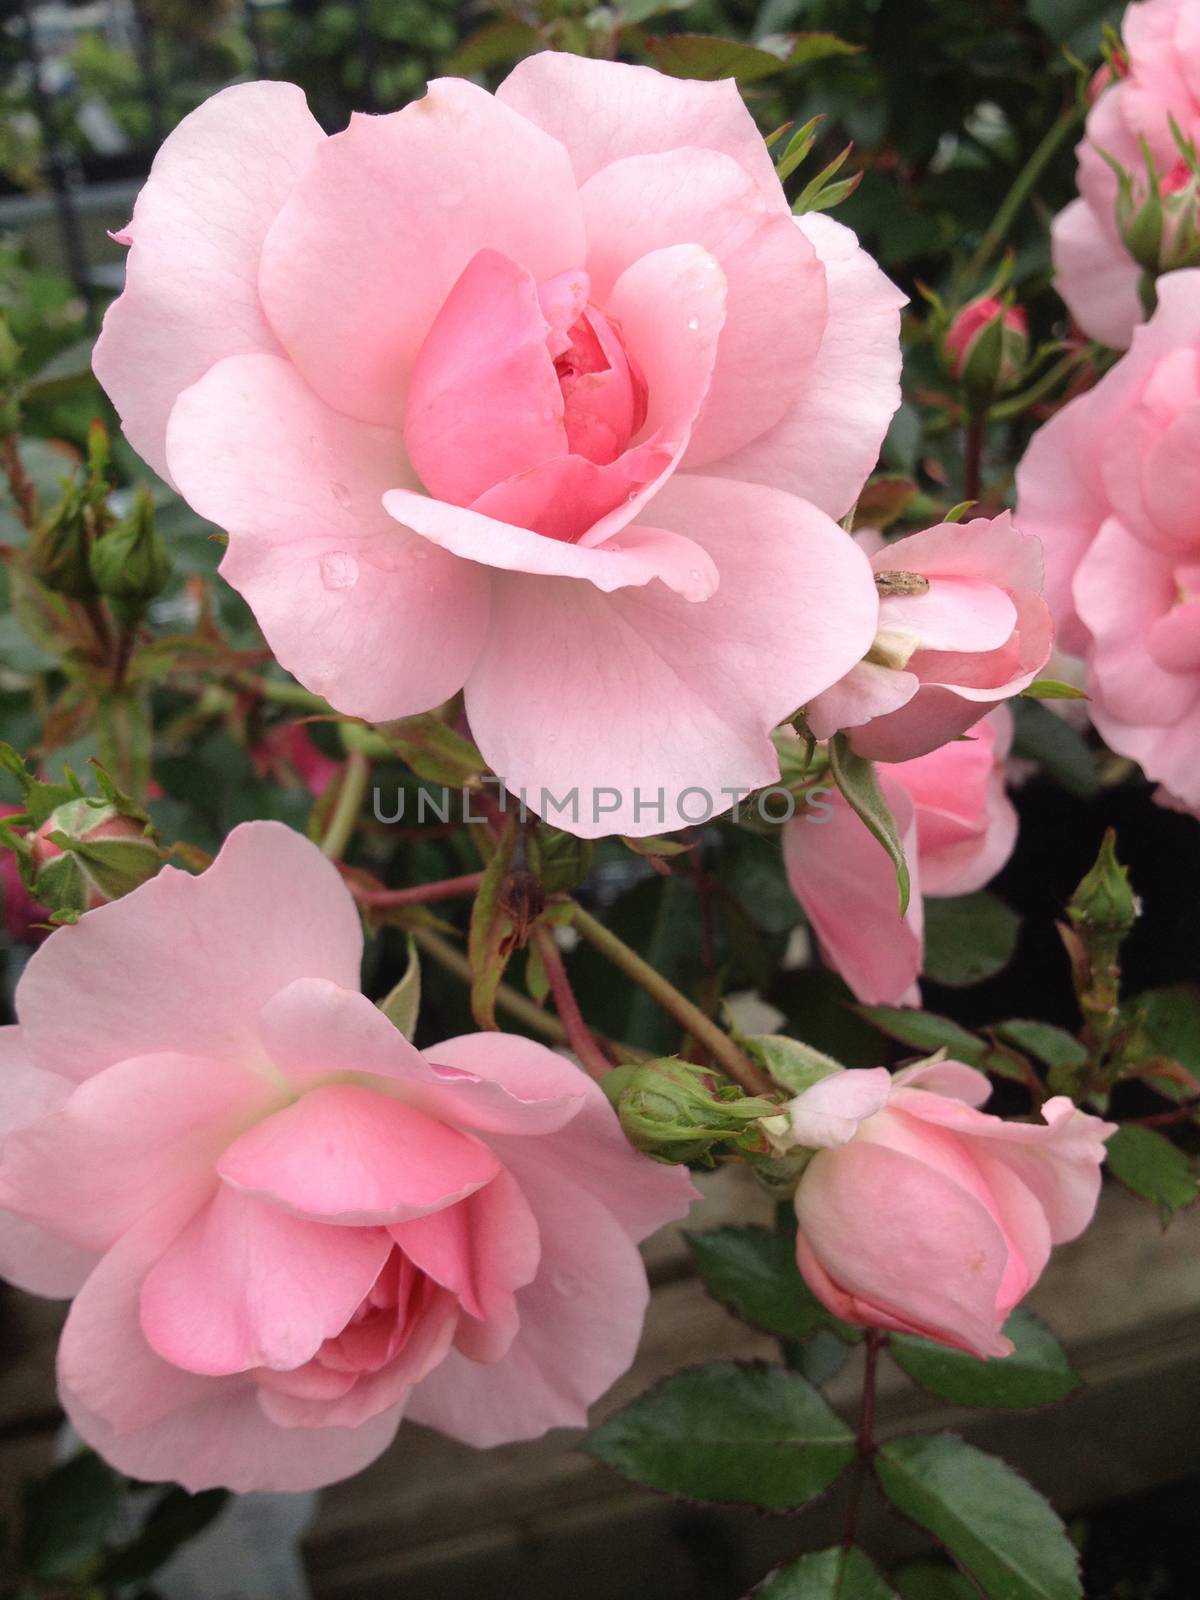 Perfect soft pink roses in full bloom on the bush